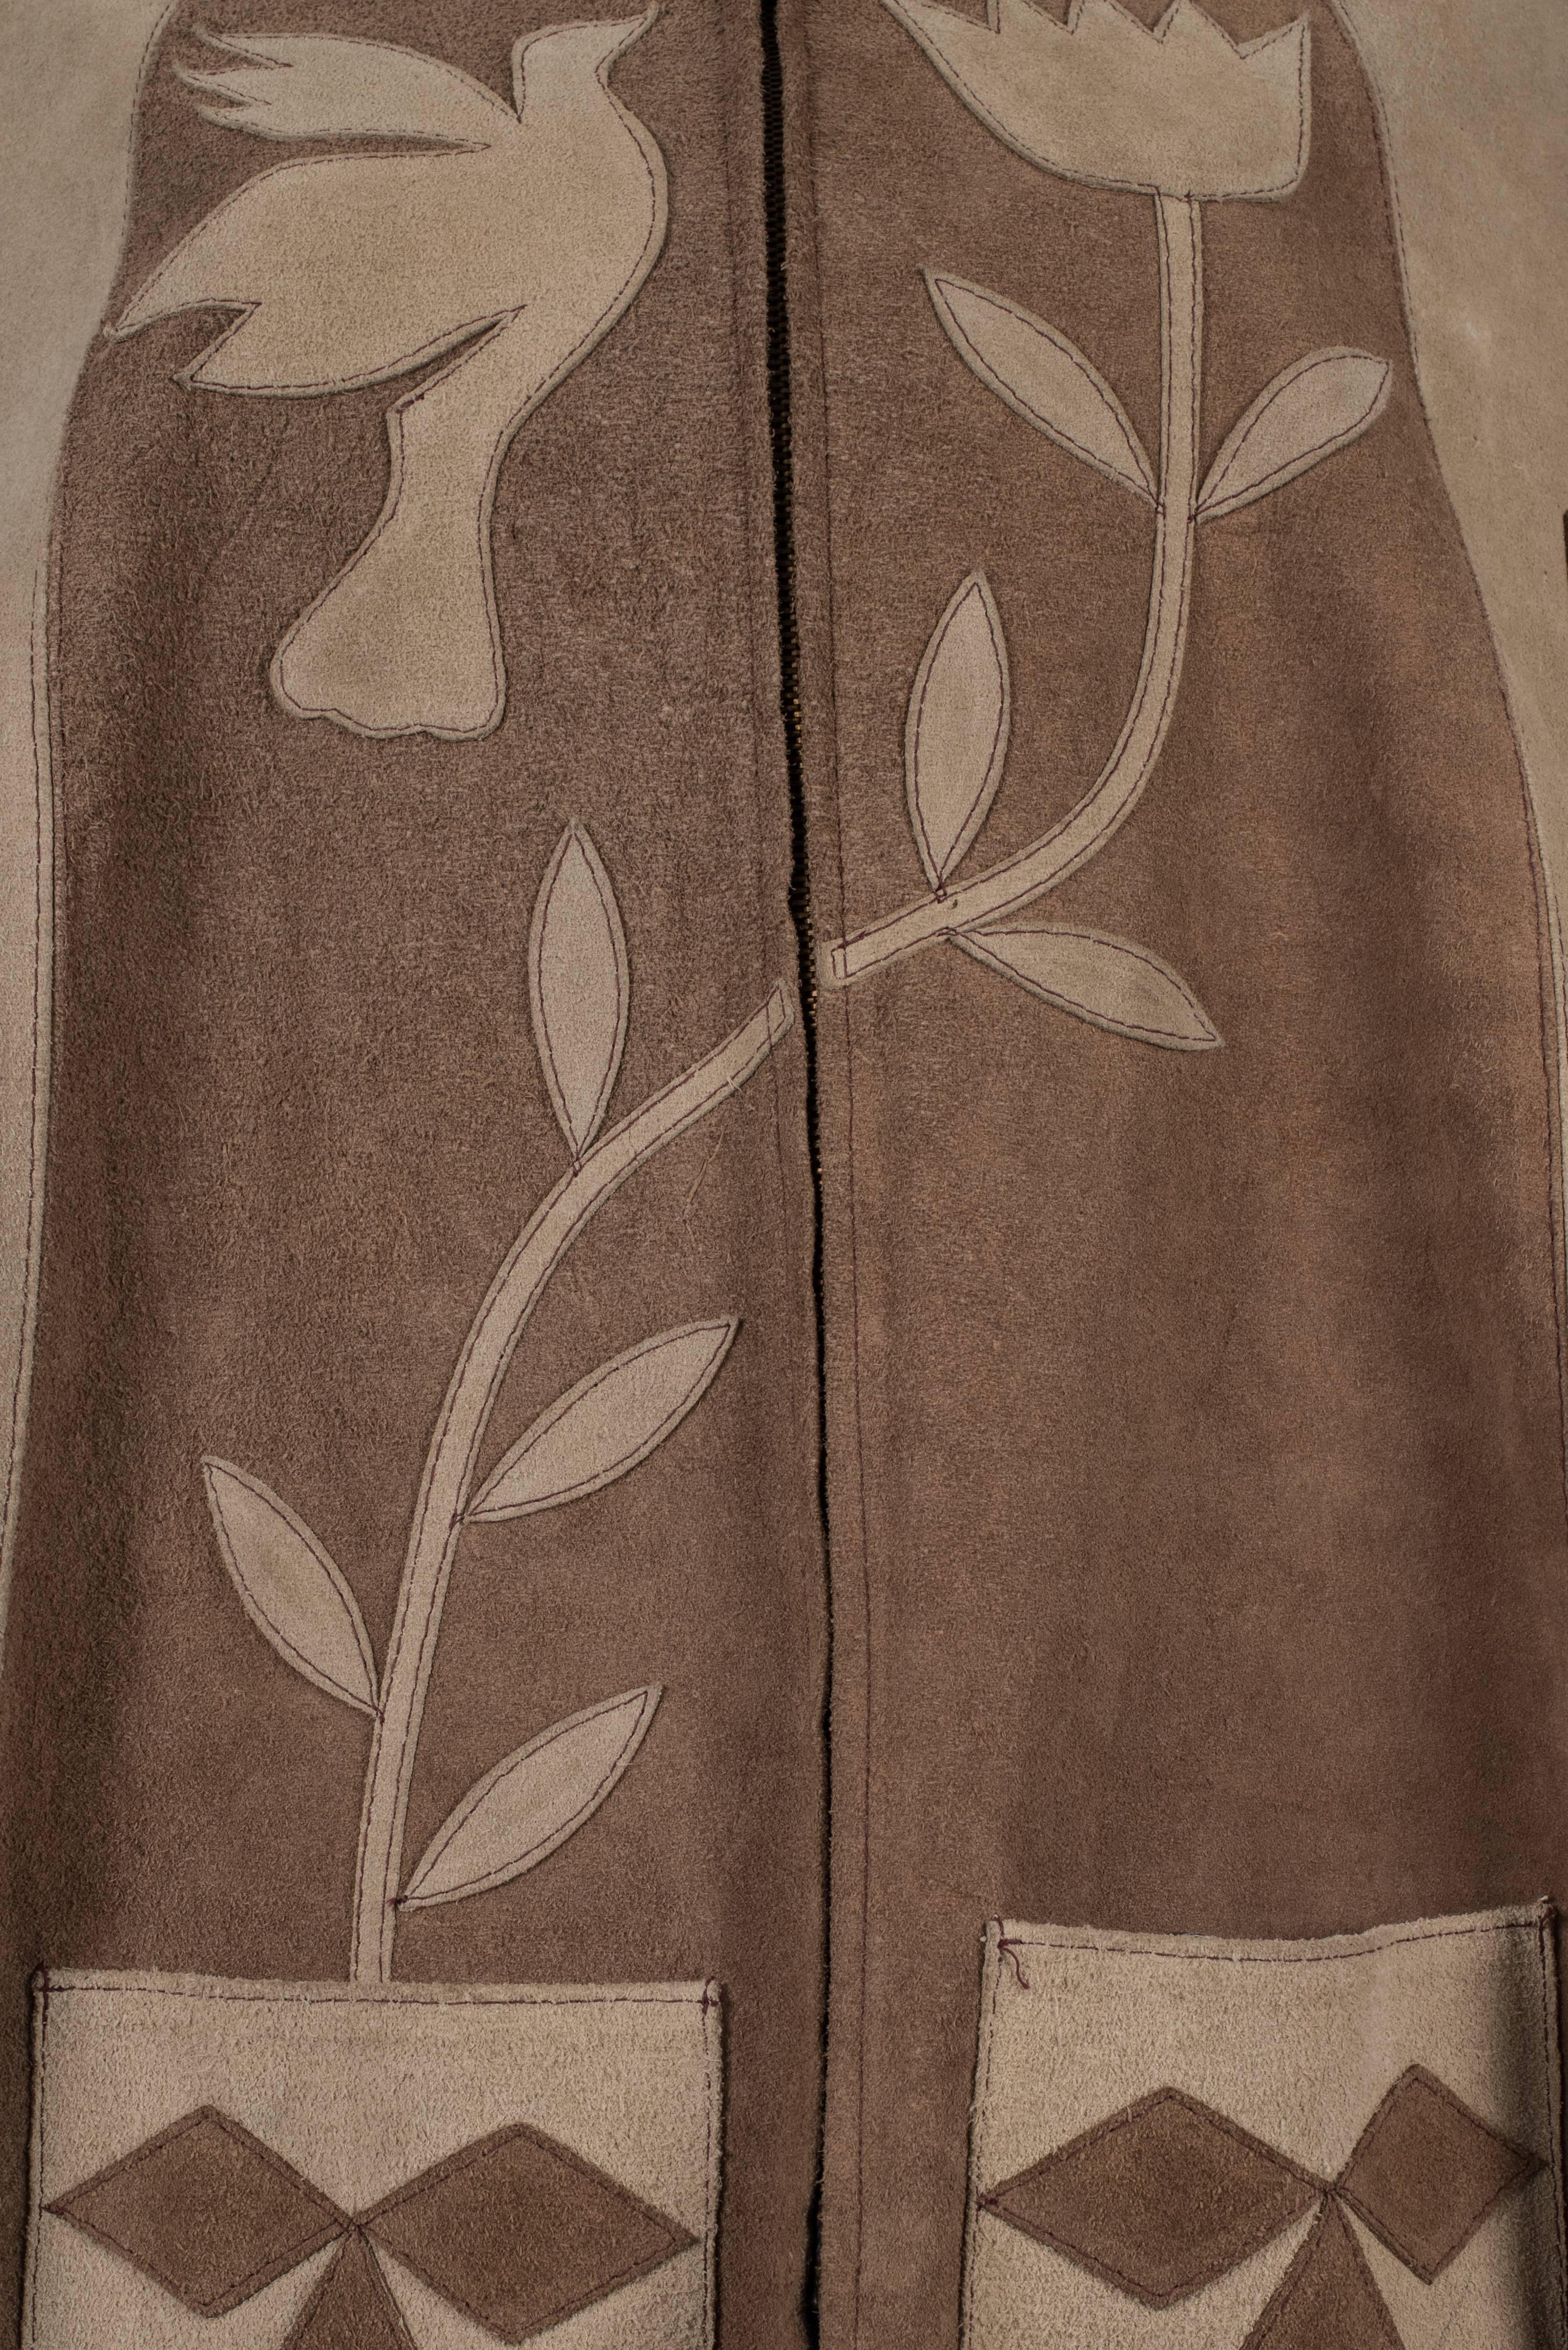 1970's Tan & Beige Suede Mexican Poncho Cape with Zip-Up Front For Sale 5